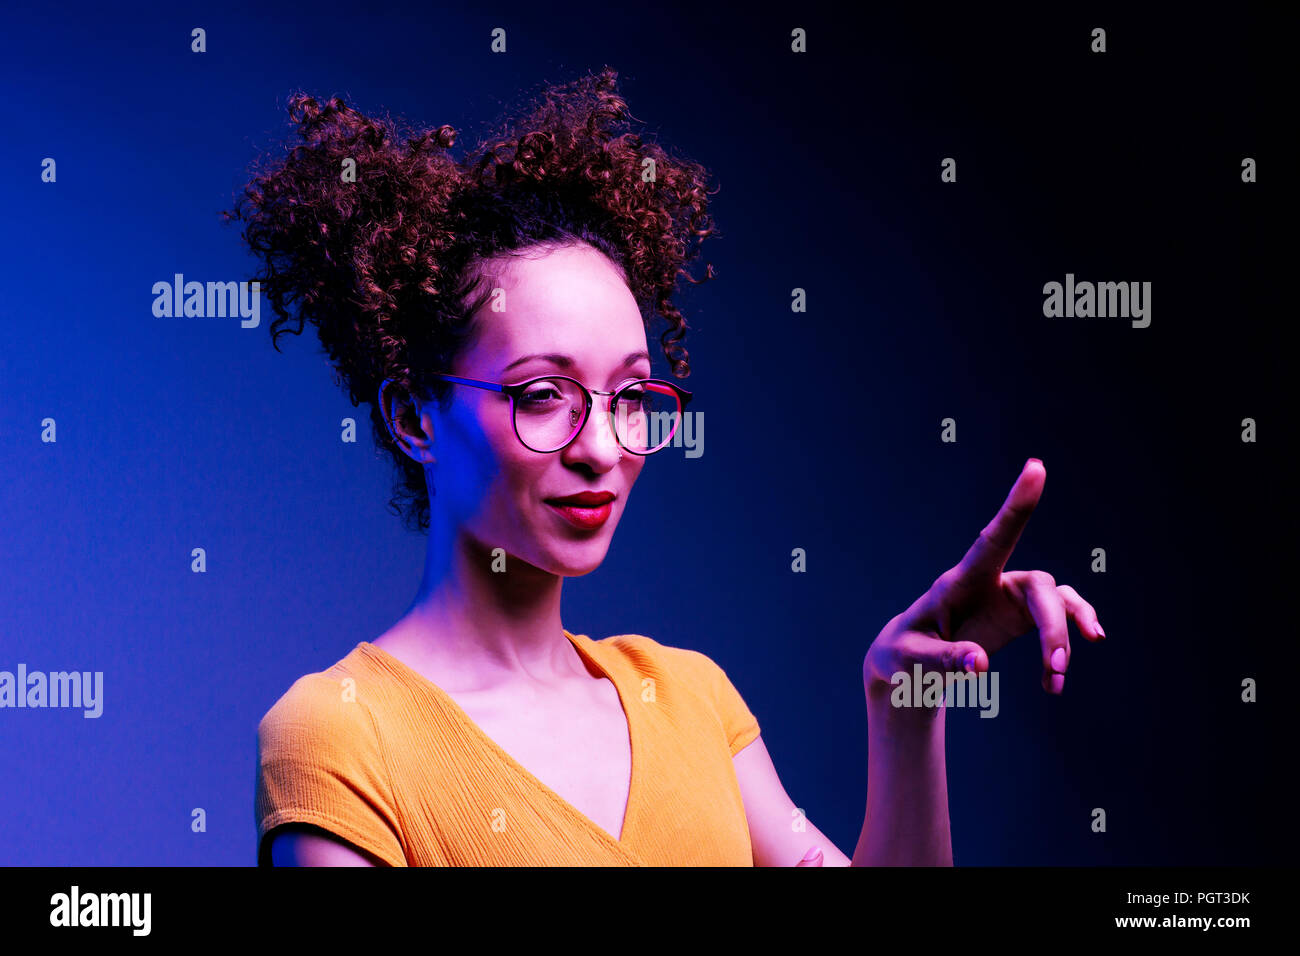 Smart girl with glasses and finger raised about to press or point at something, isolated on dark blue background Stock Photo